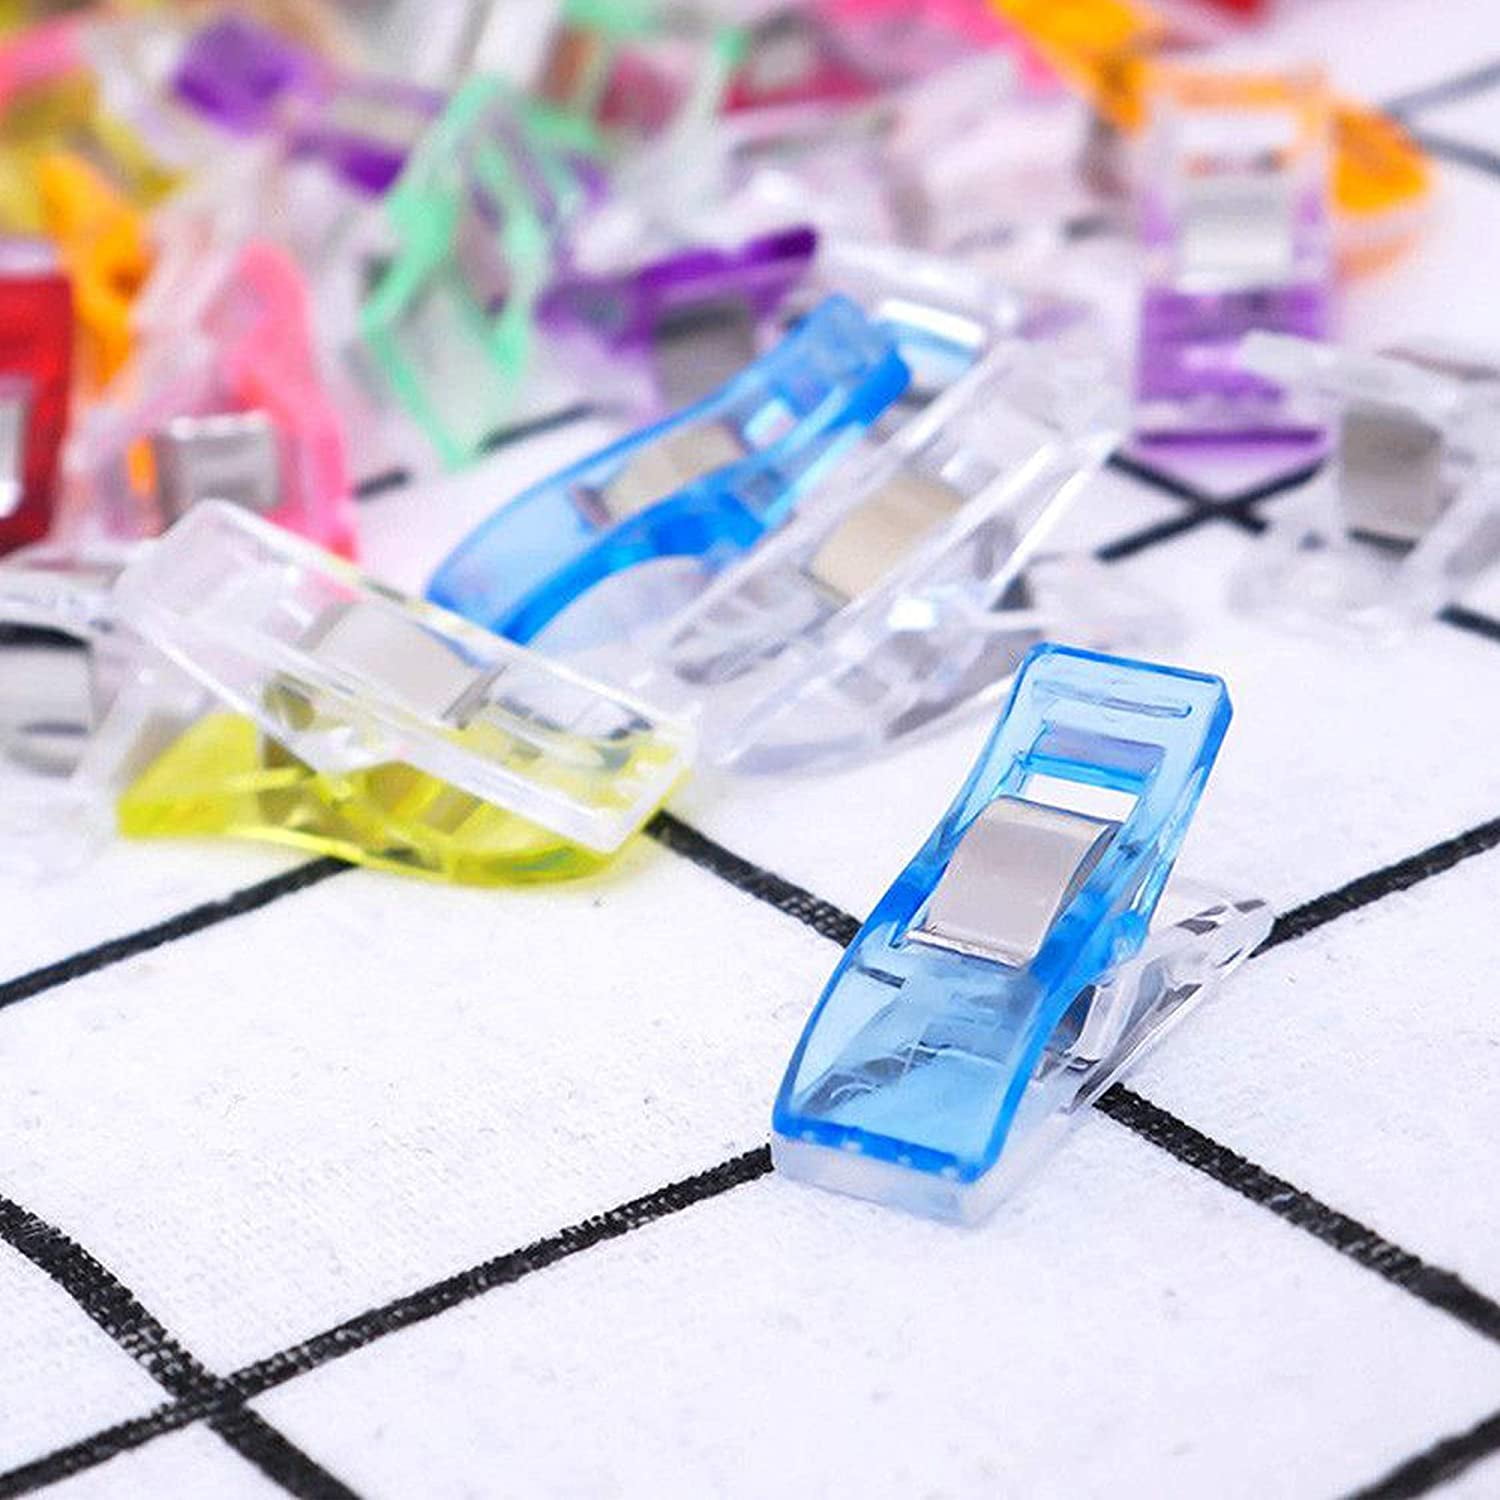 Plastic Multicolor Sewing Clips Supplies for Binding Knitting